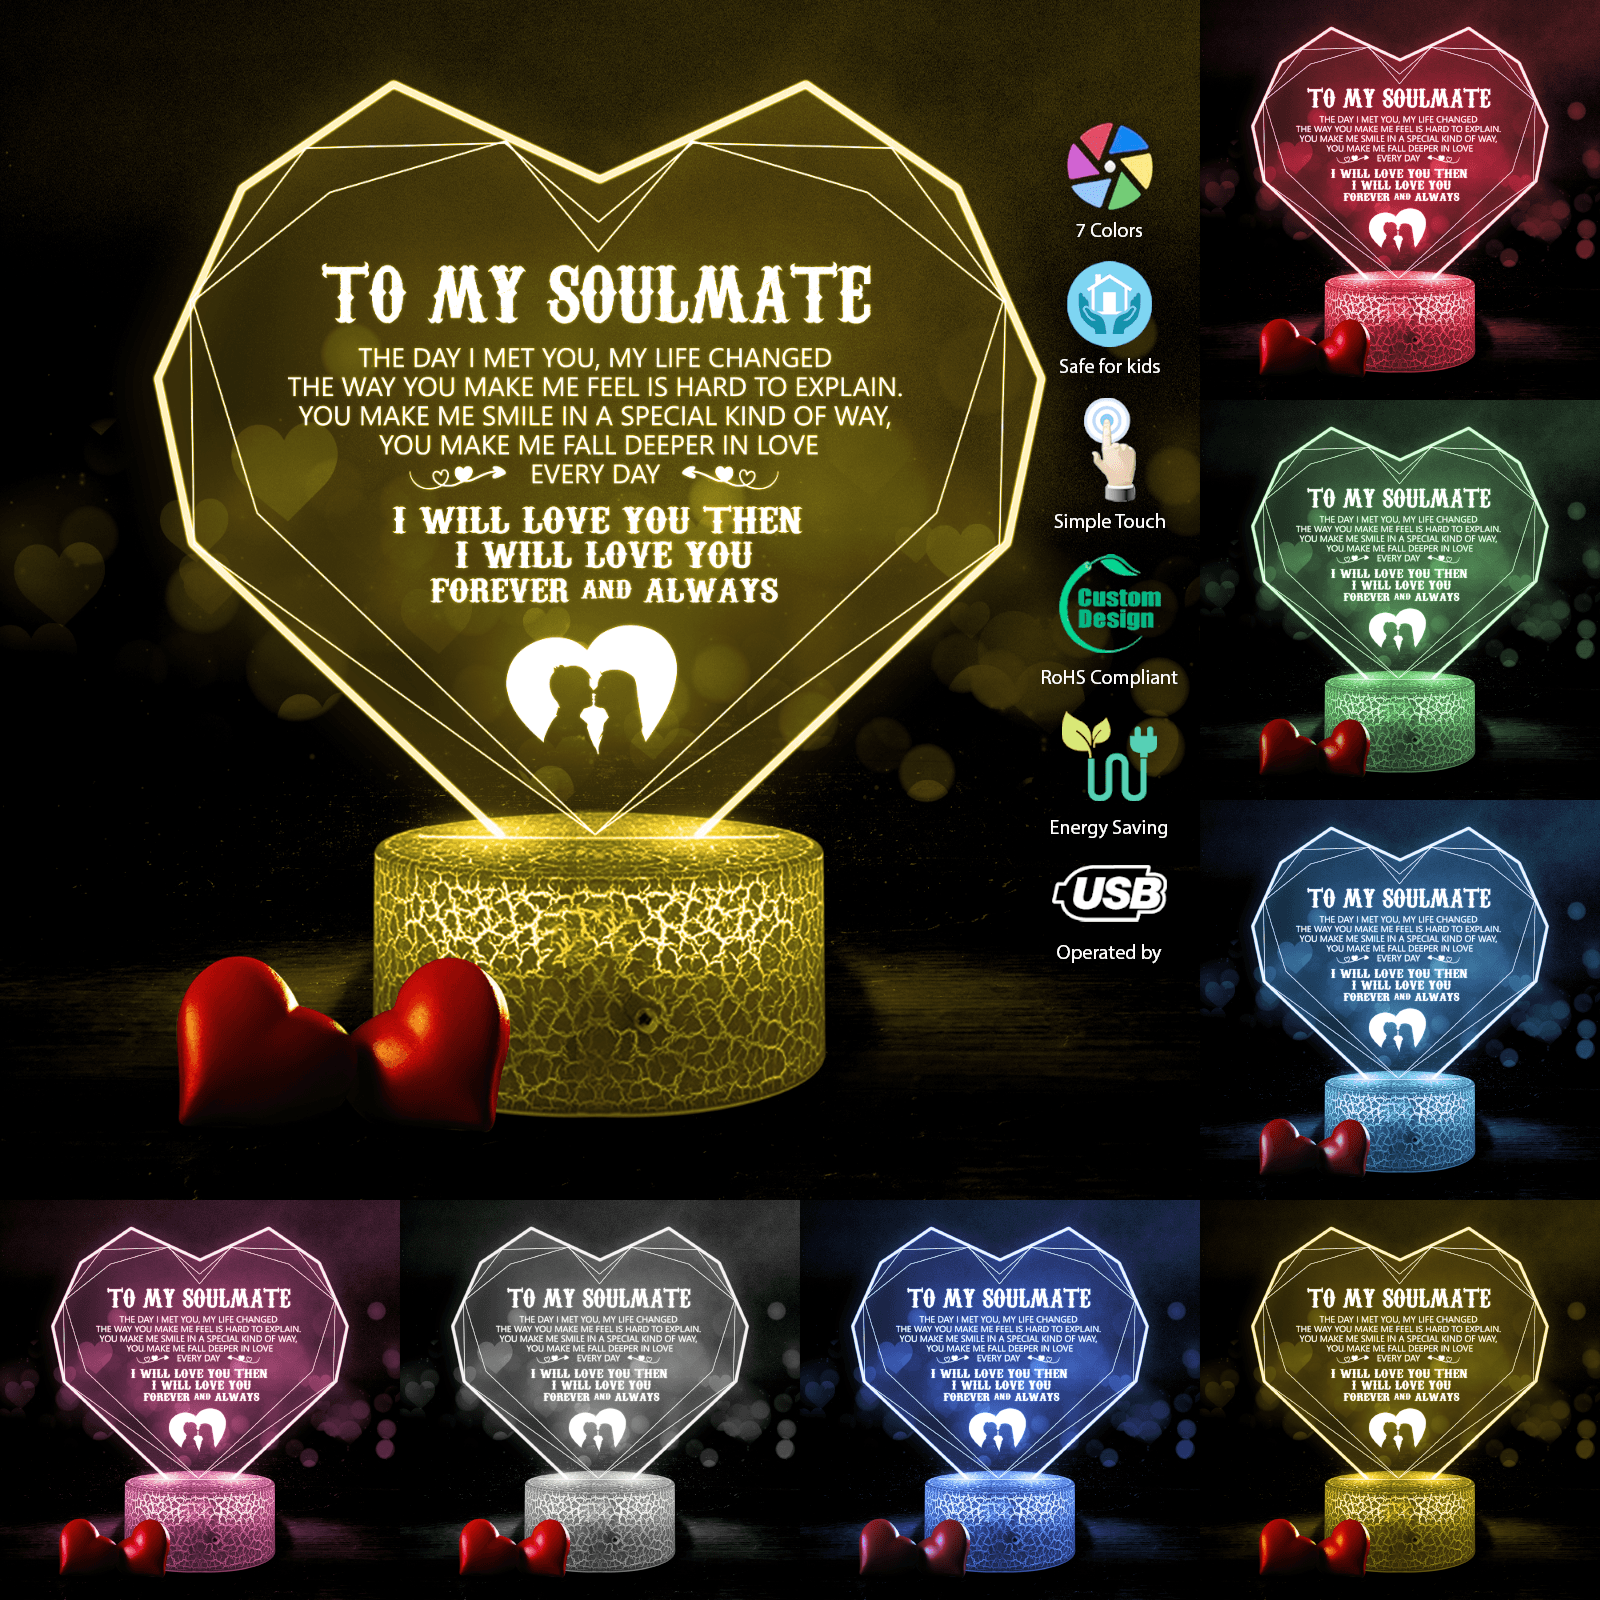 Heart Led Light - Family - To My Soulmate - You Make Me Fall Deeper In Love Every Day - Auglca13016 - Gifts Holder